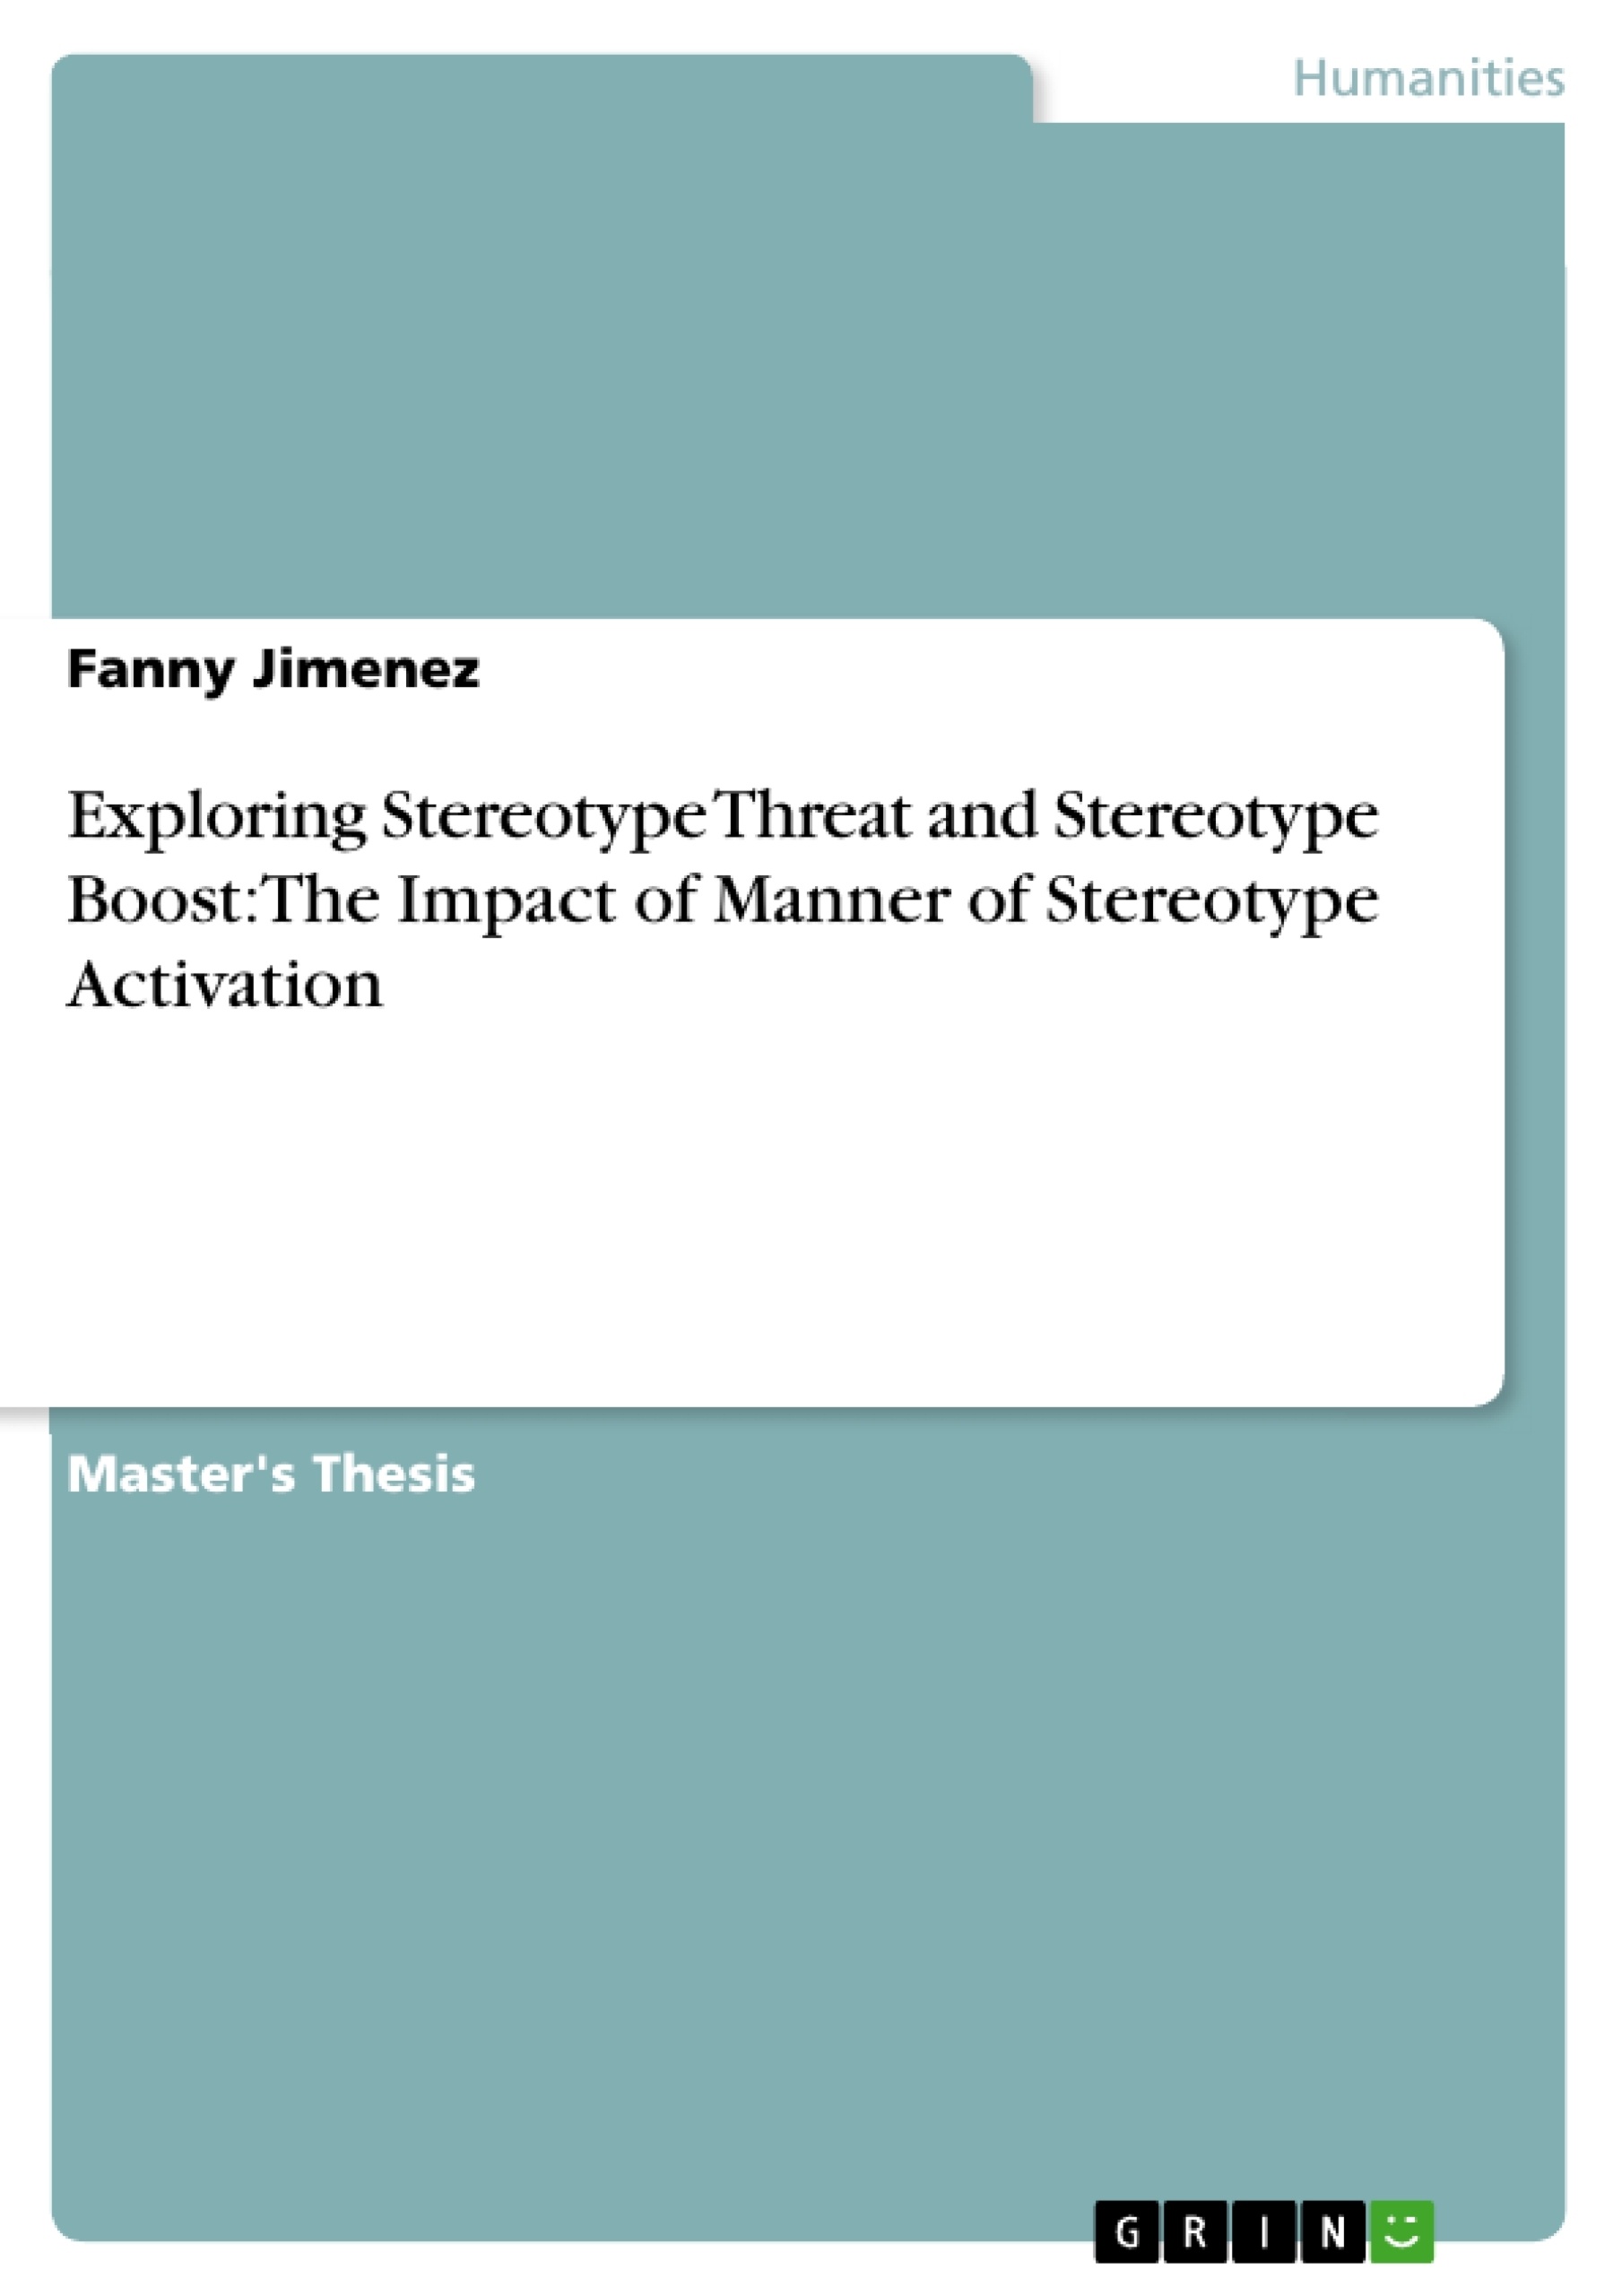 Title: Exploring Stereotype Threat and Stereotype Boost: The Impact of Manner of Stereotype Activation